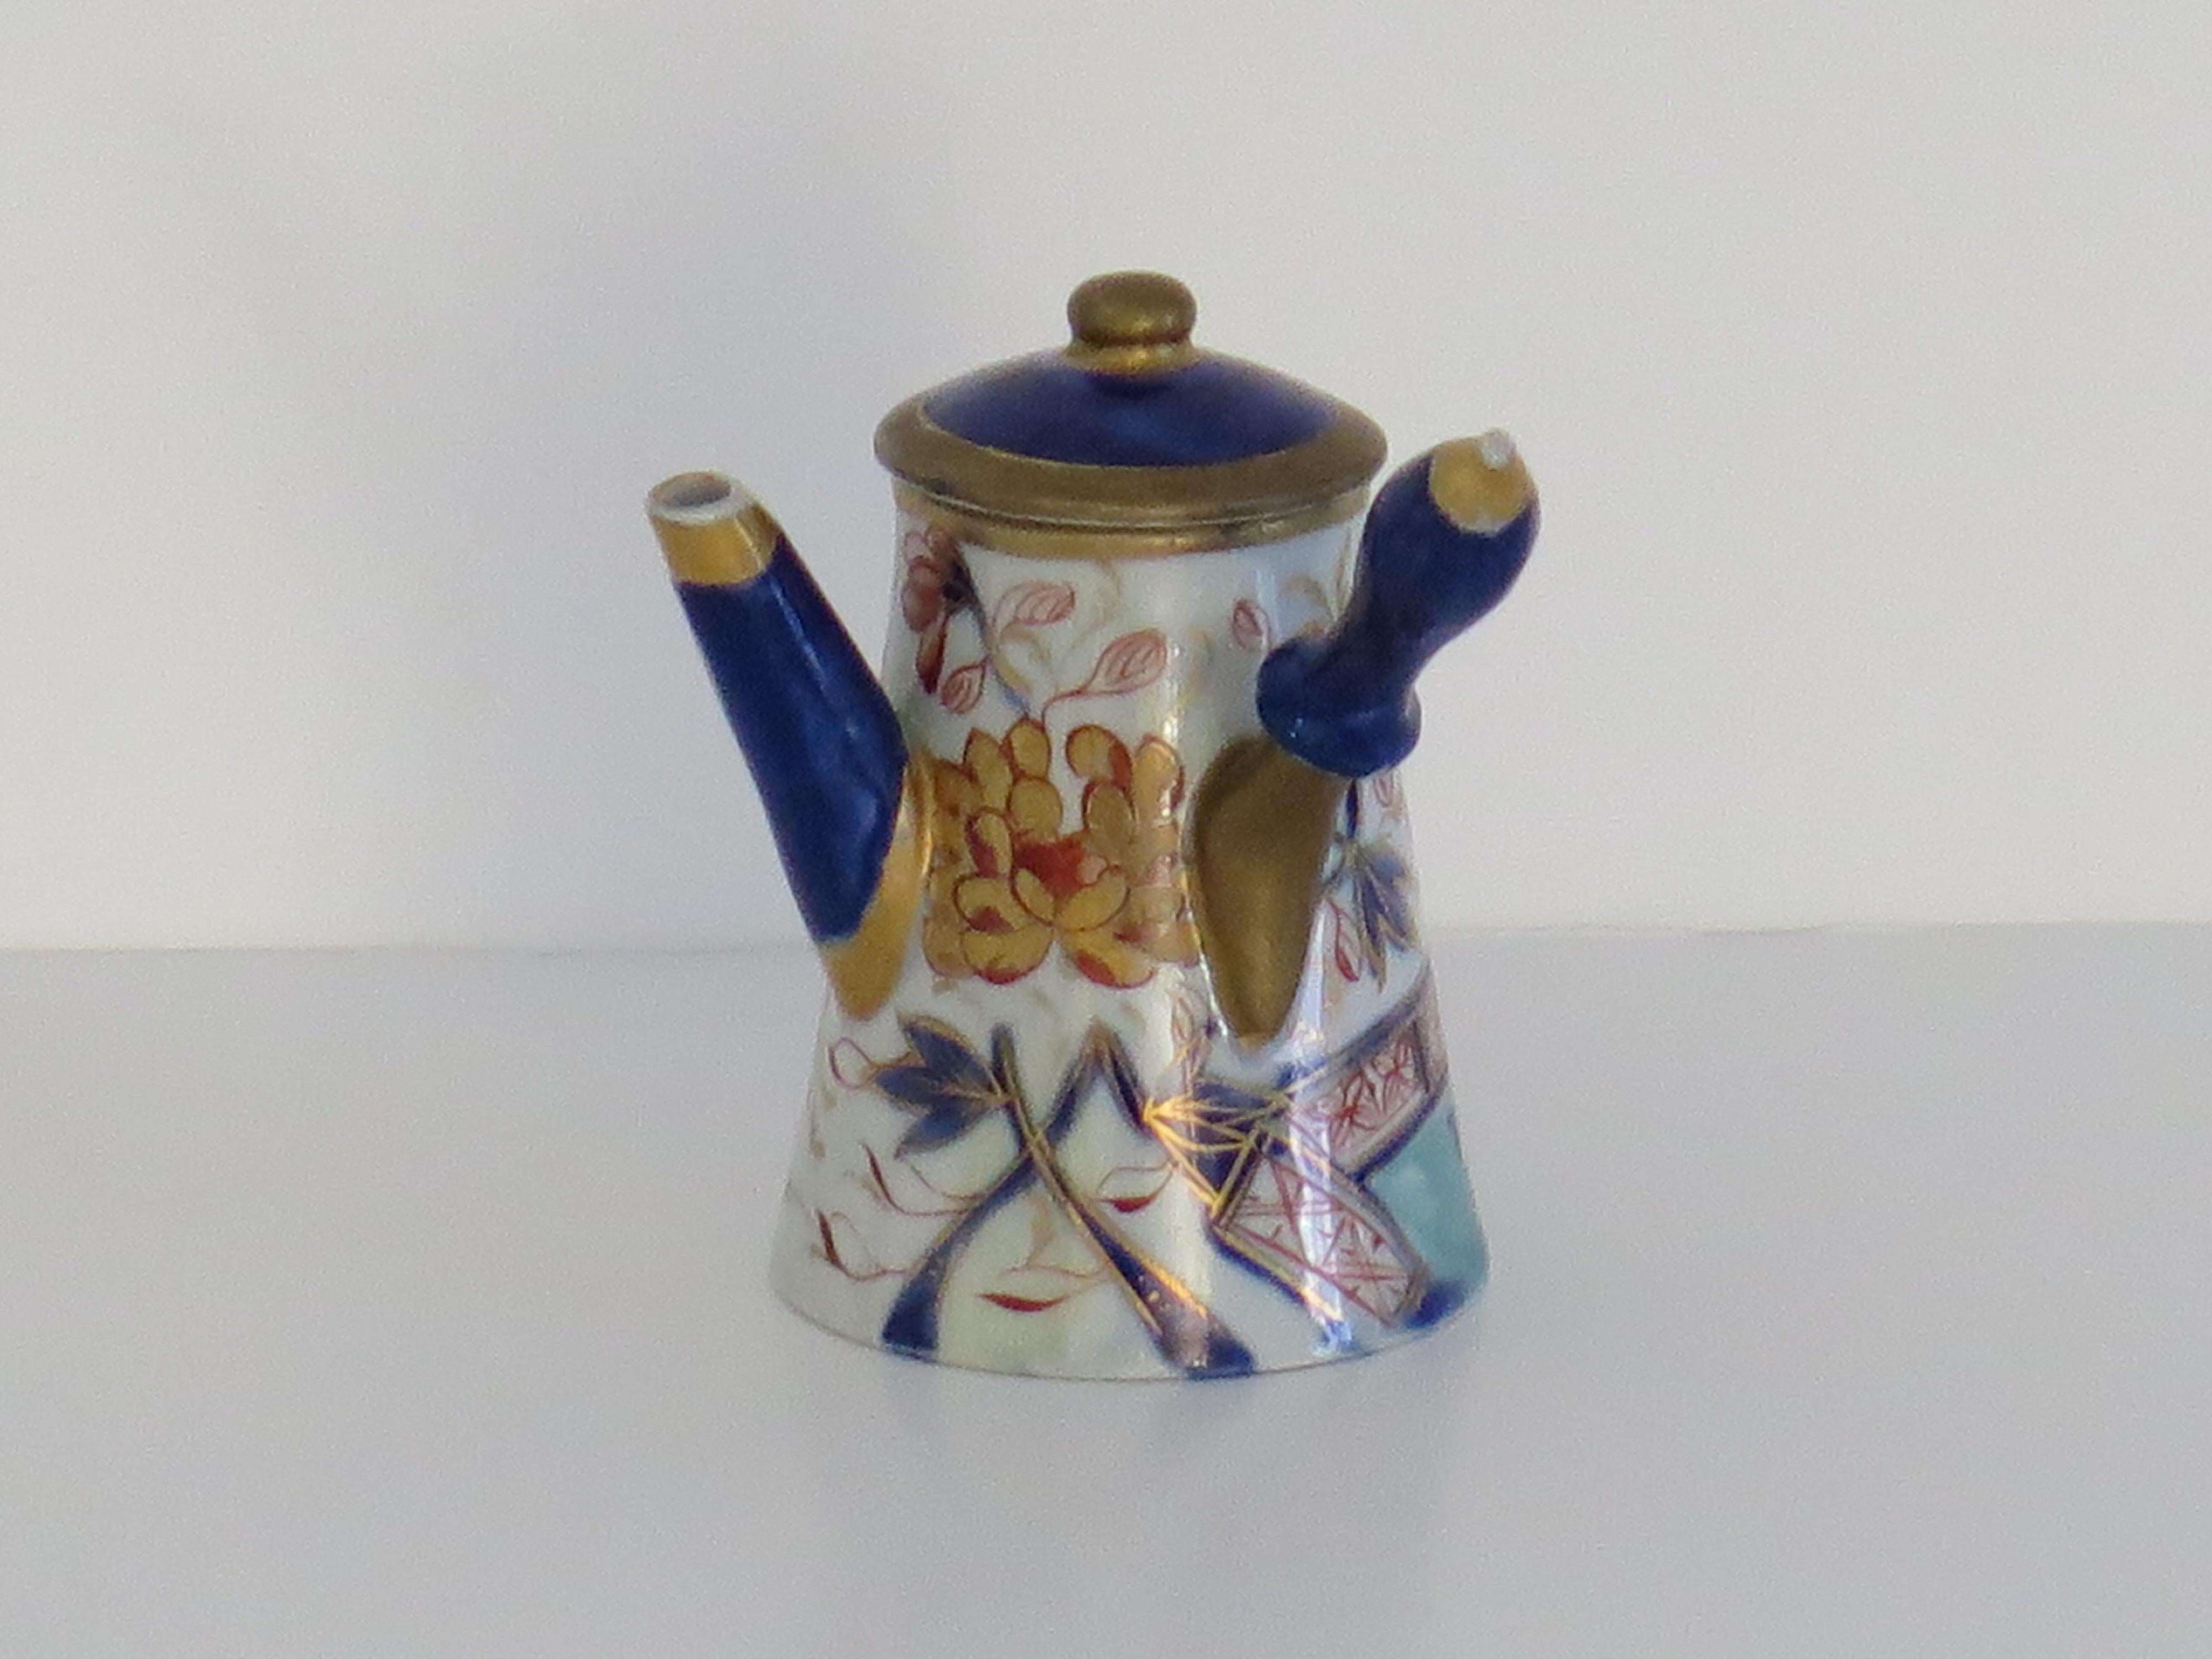 Rare Mason's Ironstone Miniature Coffee Pot in Gold Rose Japan pattern, Ca 1820 For Sale 2